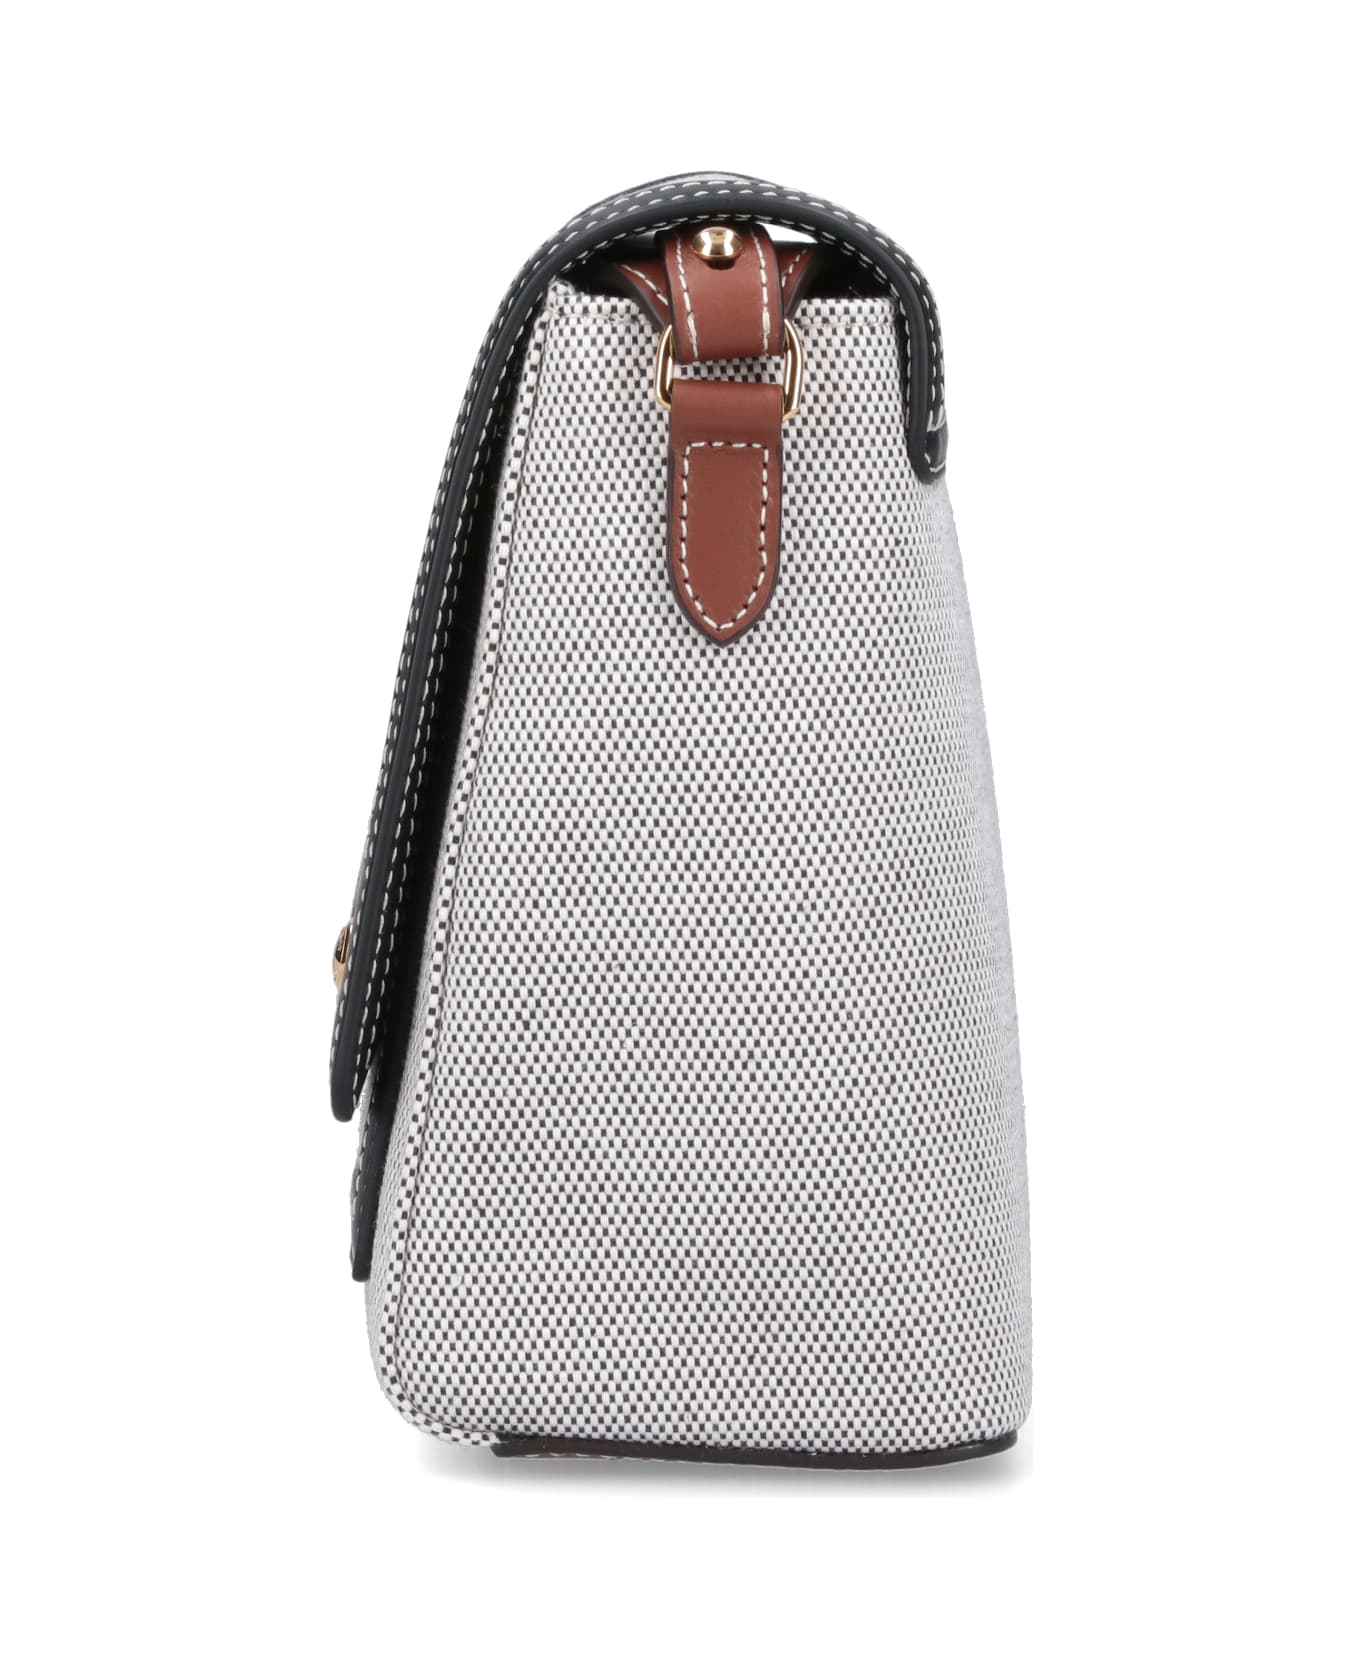 Burberry - horseferry Note Shoulder Bag - Gray ショルダーバッグ